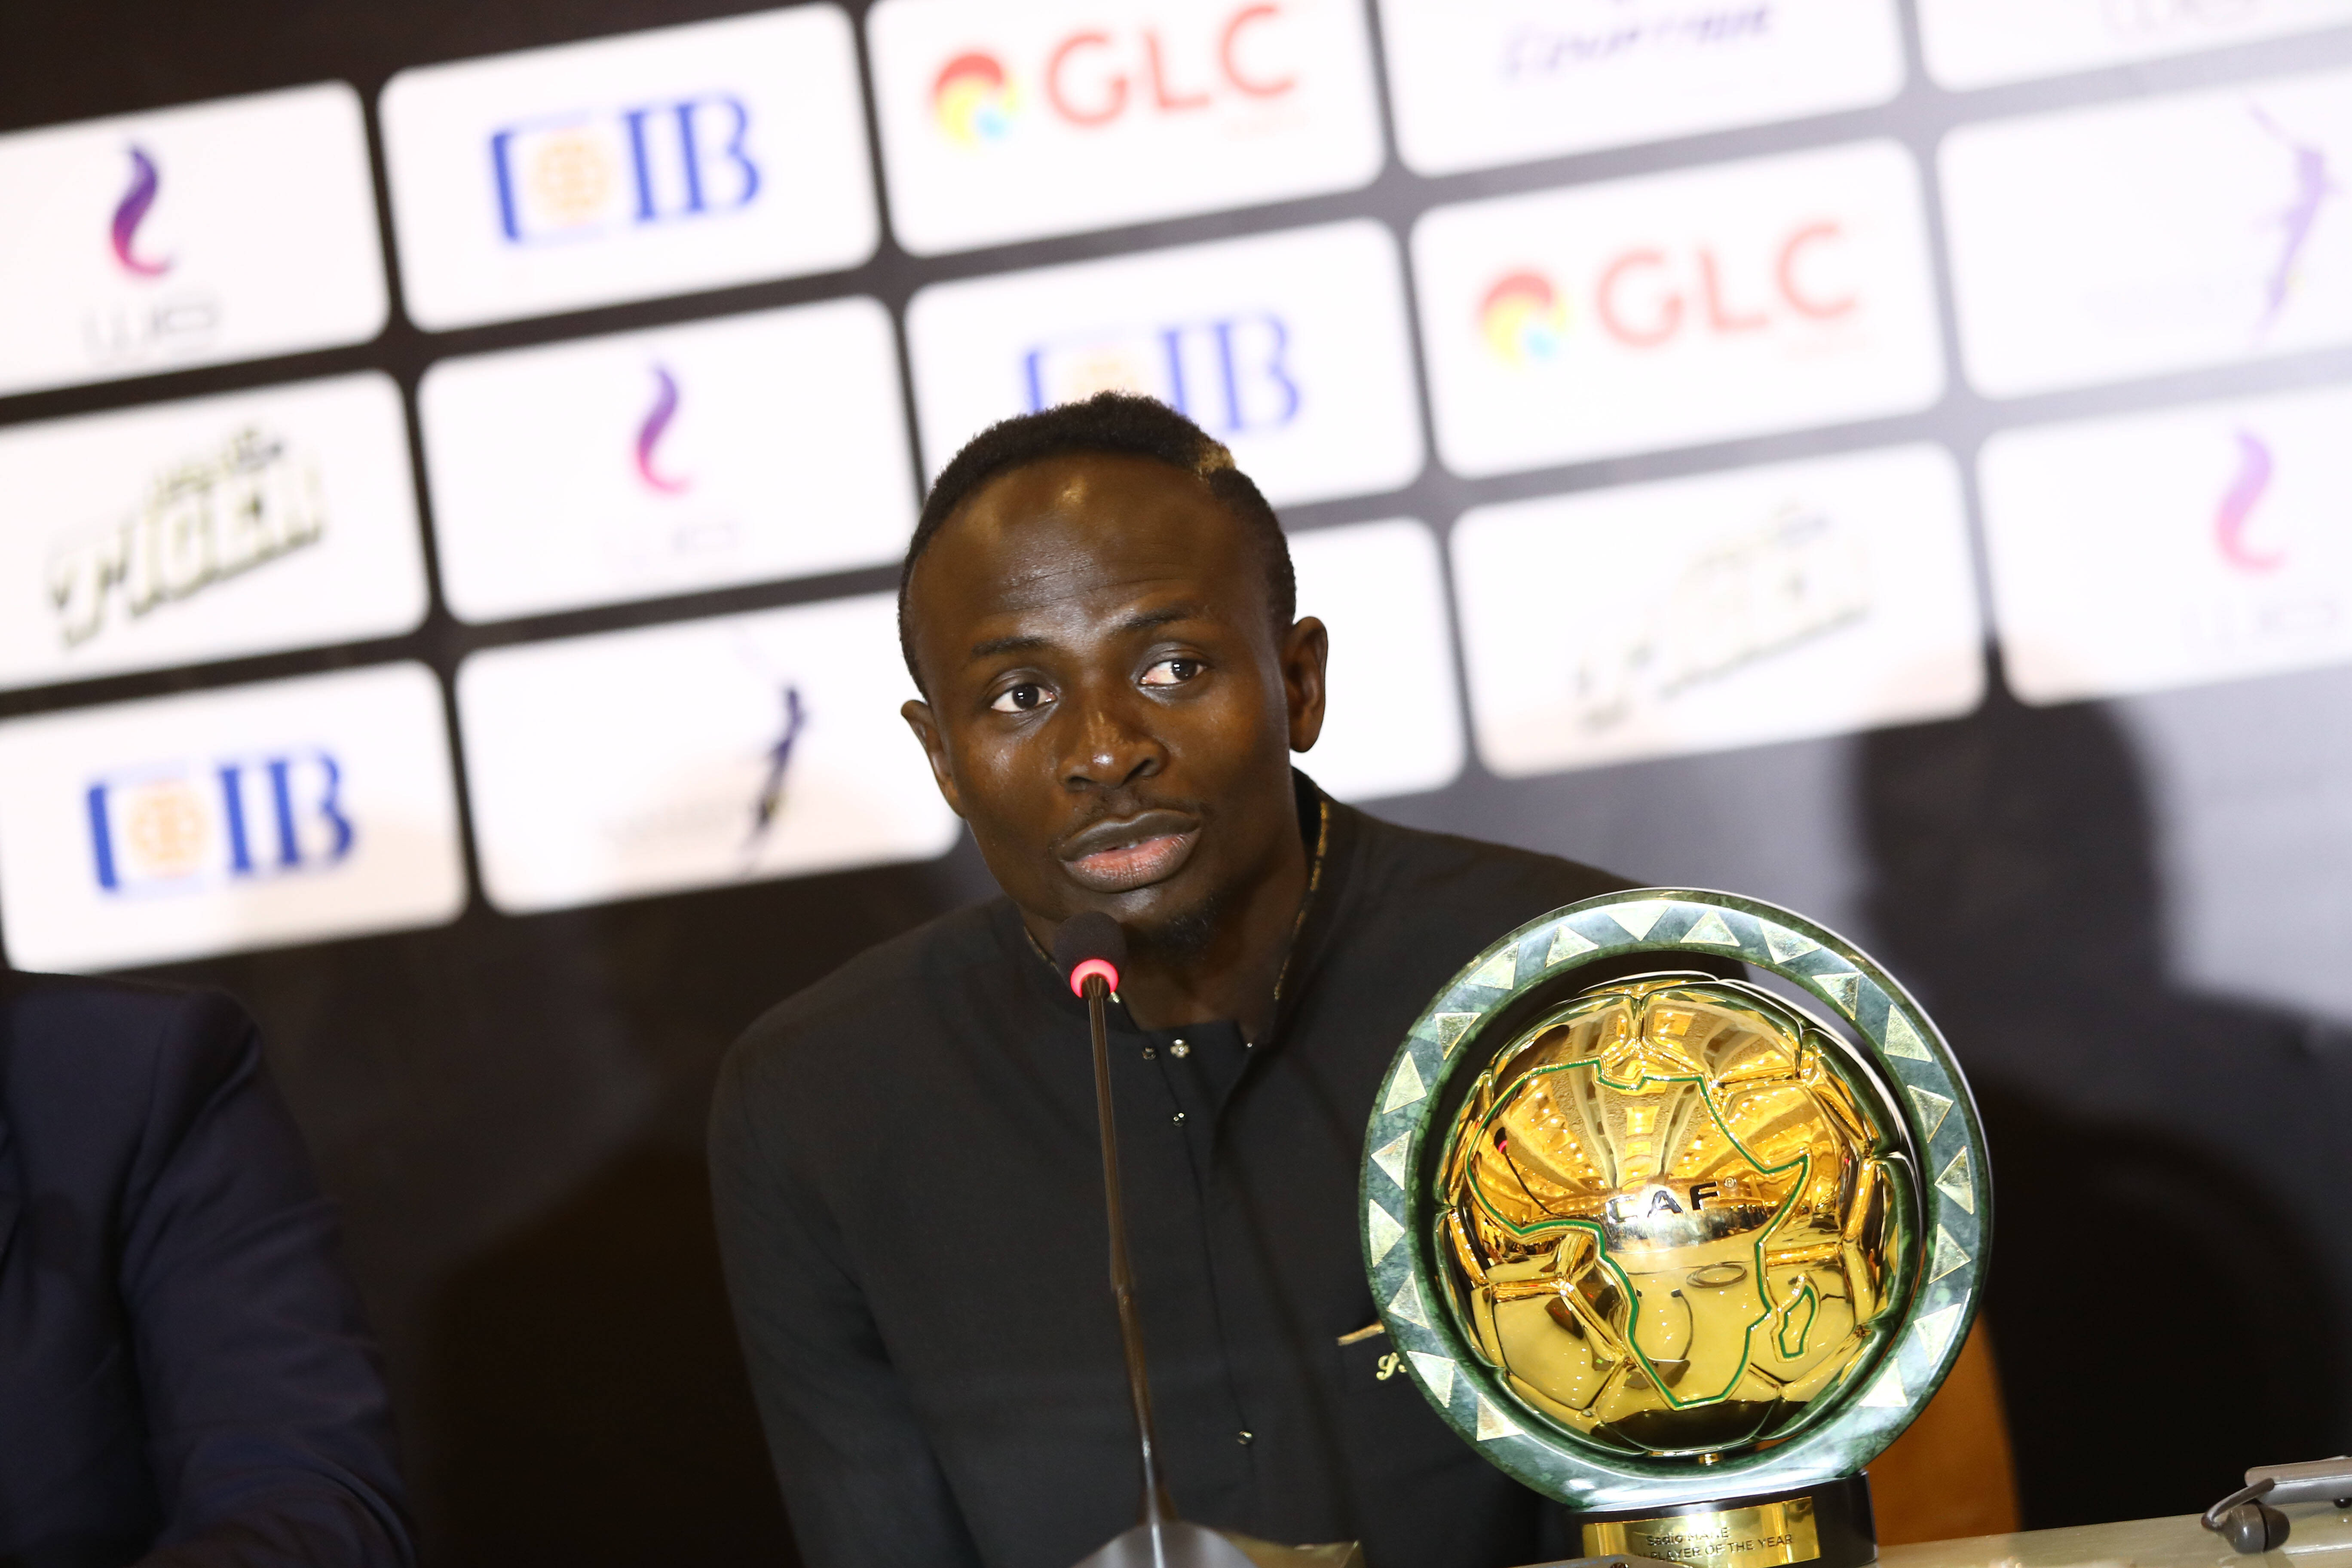 Sadio Mane pictured with his trophy after being named the African Footballer of the Year at the 2019 CAF awards